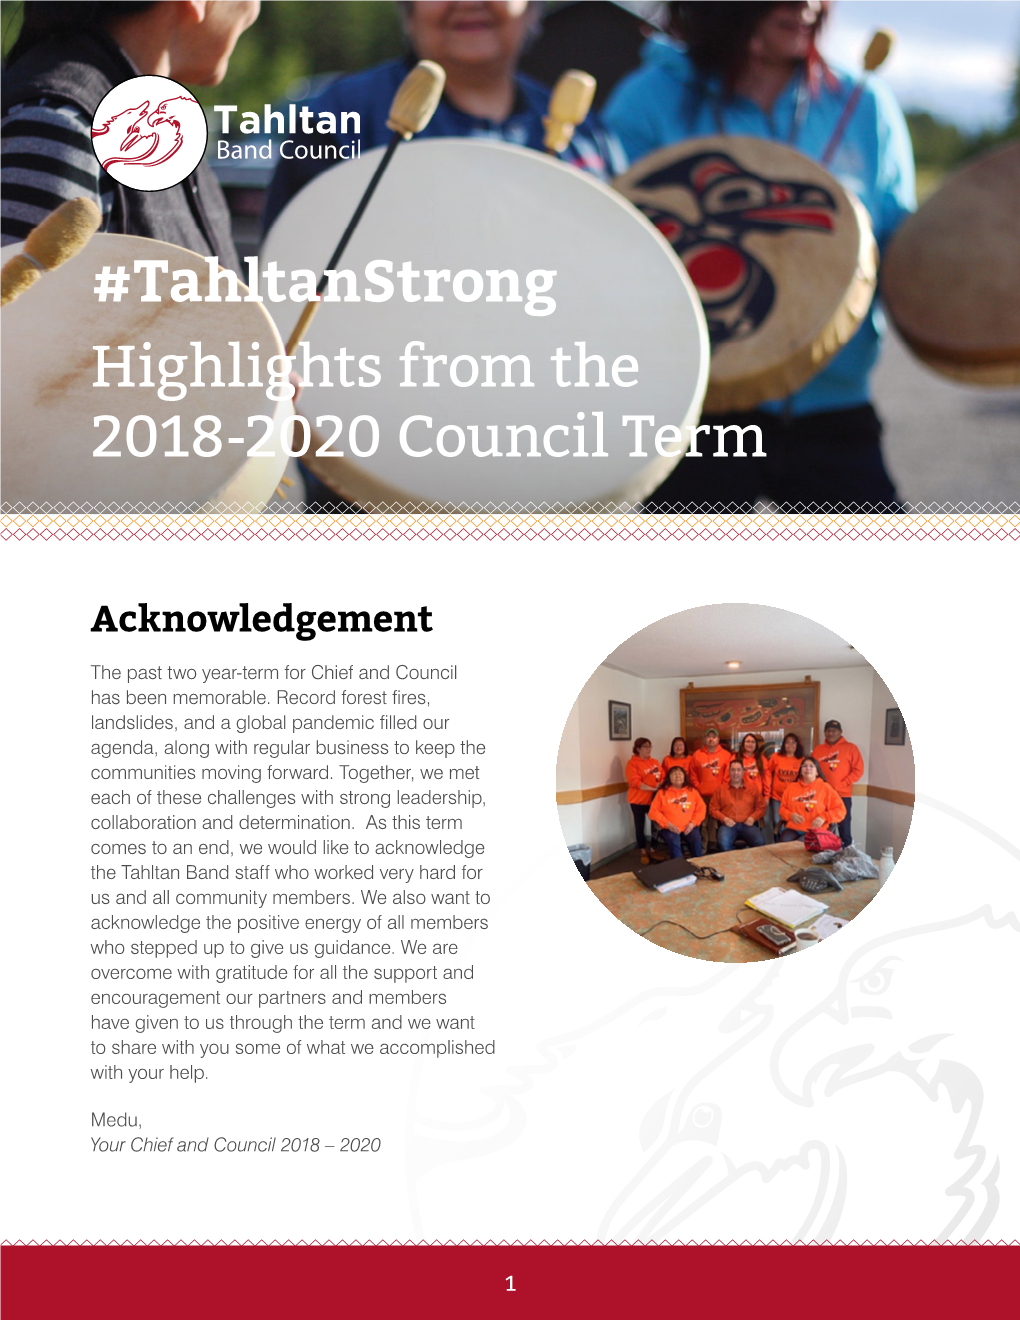 Tahltanstrong Highlights from the 2018-2020 Council Term